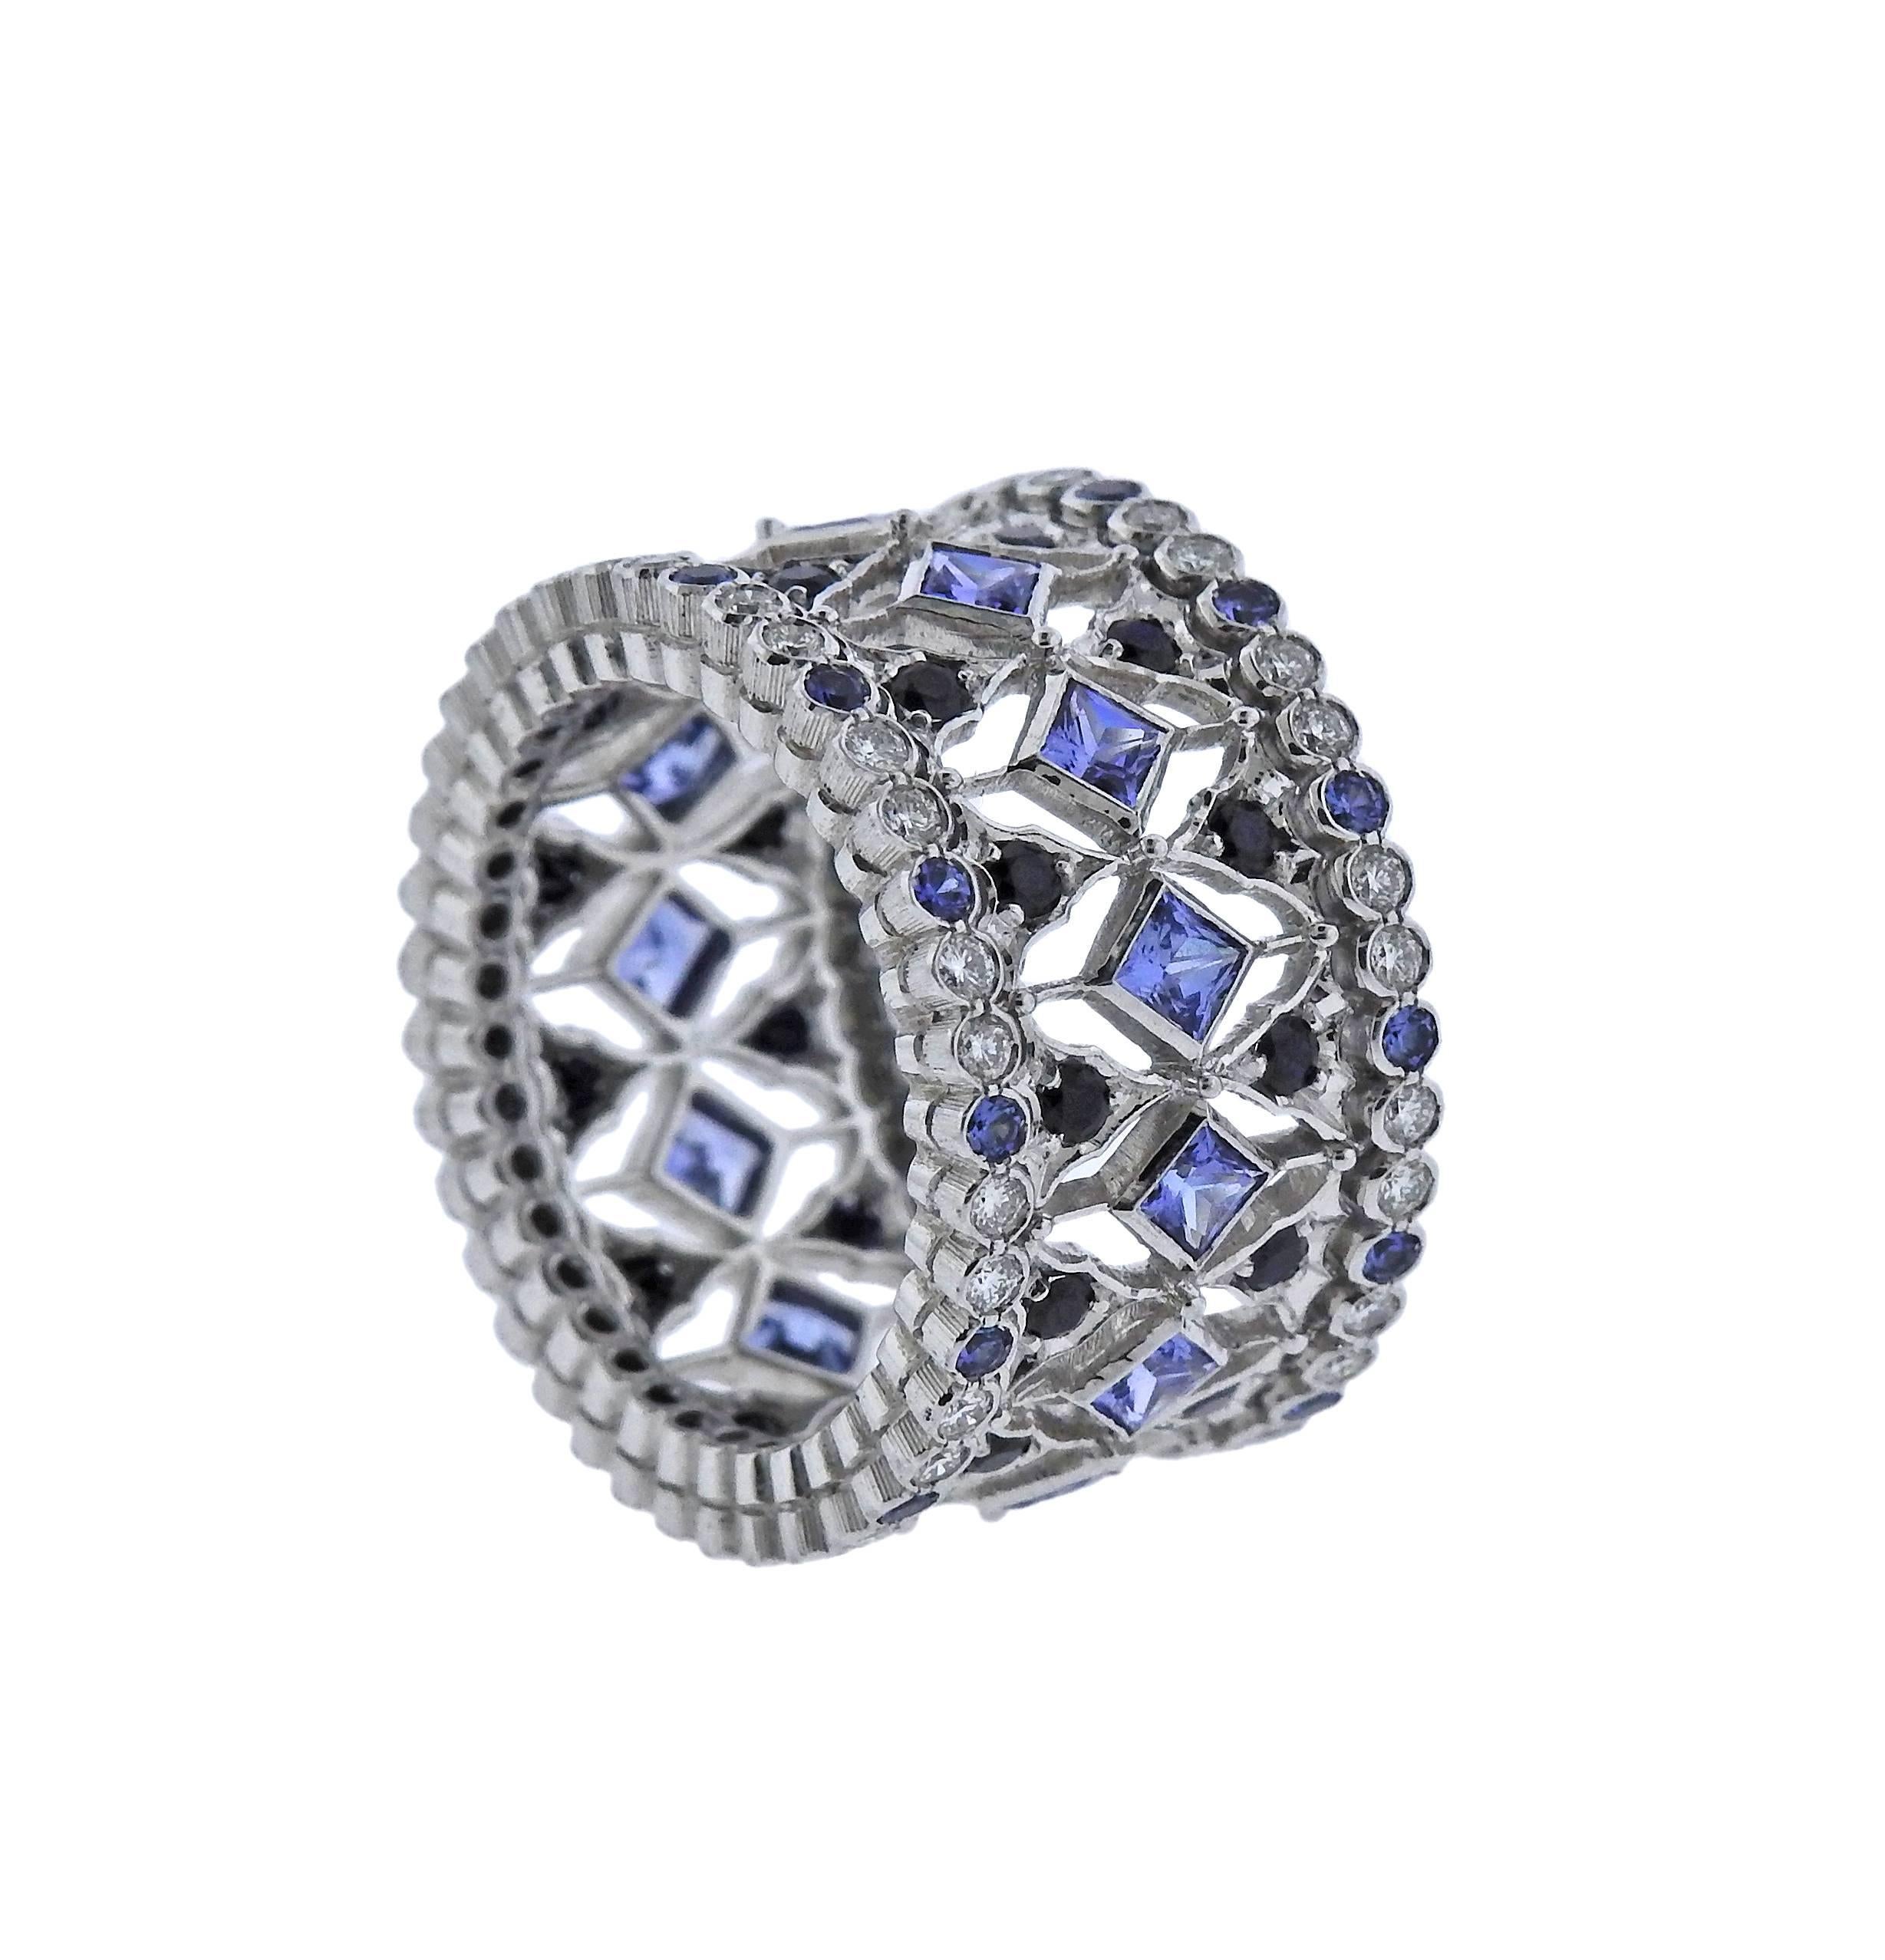 18k white gold ring crafted by Buccellati featuring approximately 0.69ctw of G/VS diamonds and approximately 2.83ctw in sapphires. Retails for $54700 . Ring size - 7, ring top is 12.3mm wide, weighs 11.4 grams. Marked: Buccellati , 750, 1.